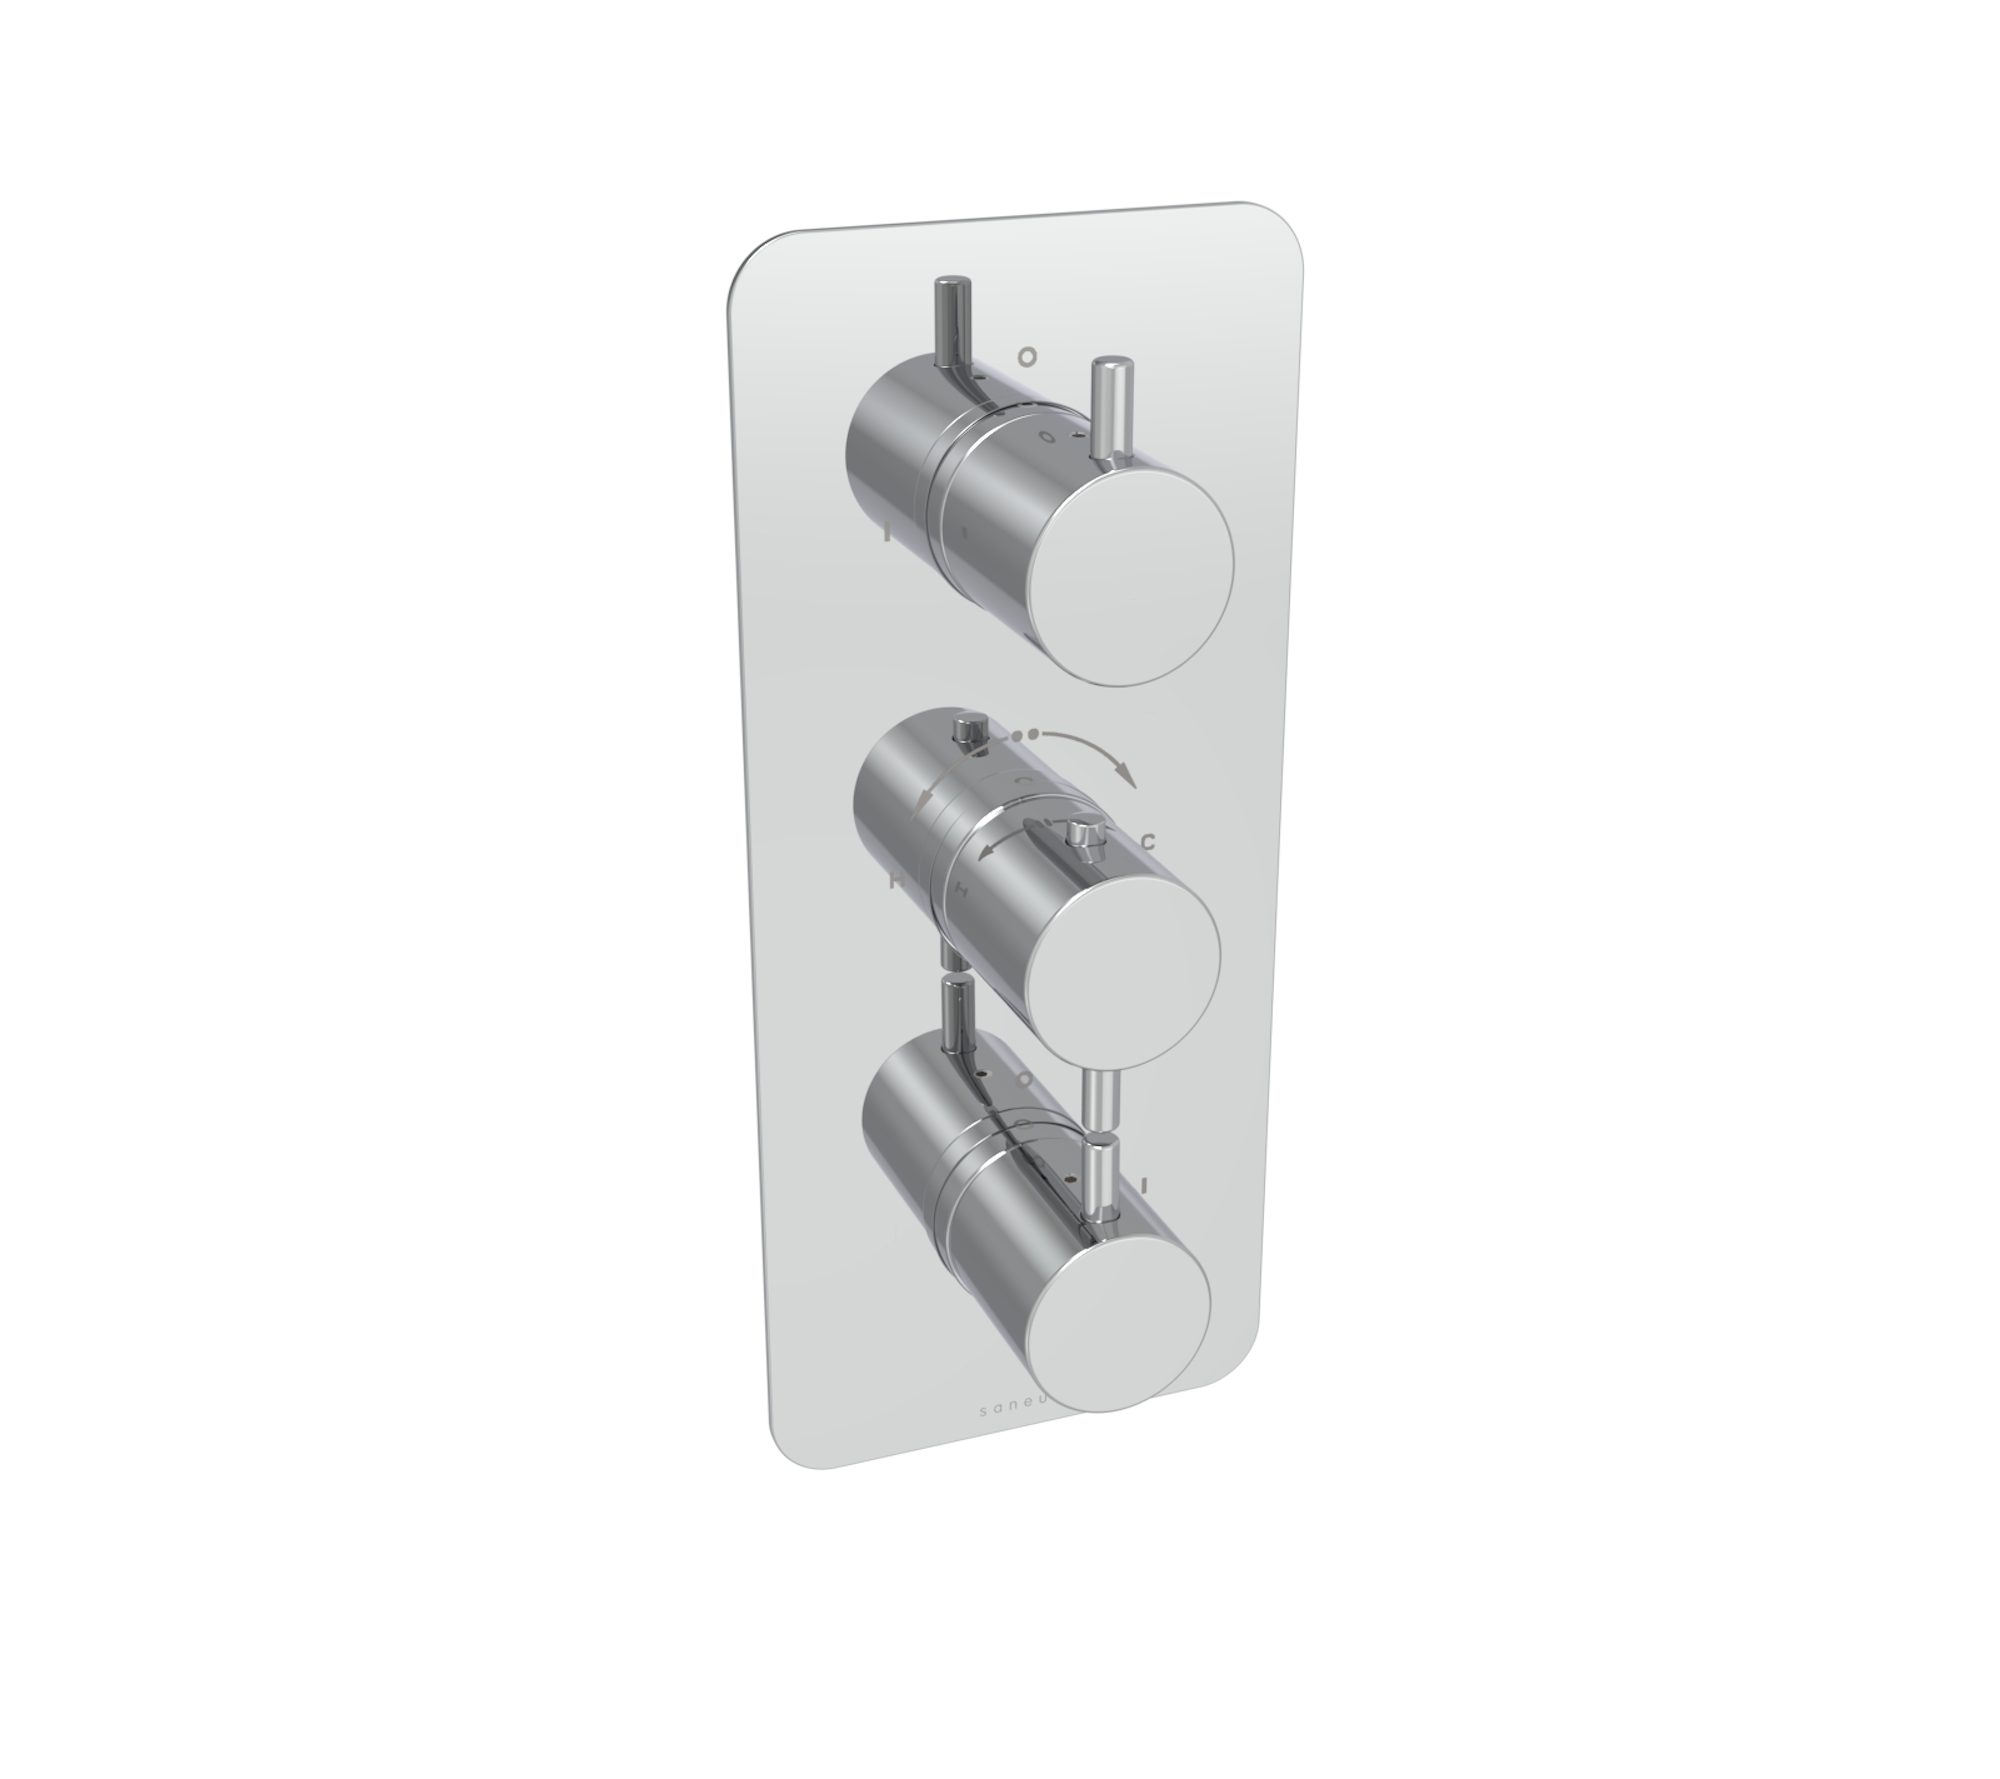 COS 2 way thermostatic low pressure shower valve kit - Chrome